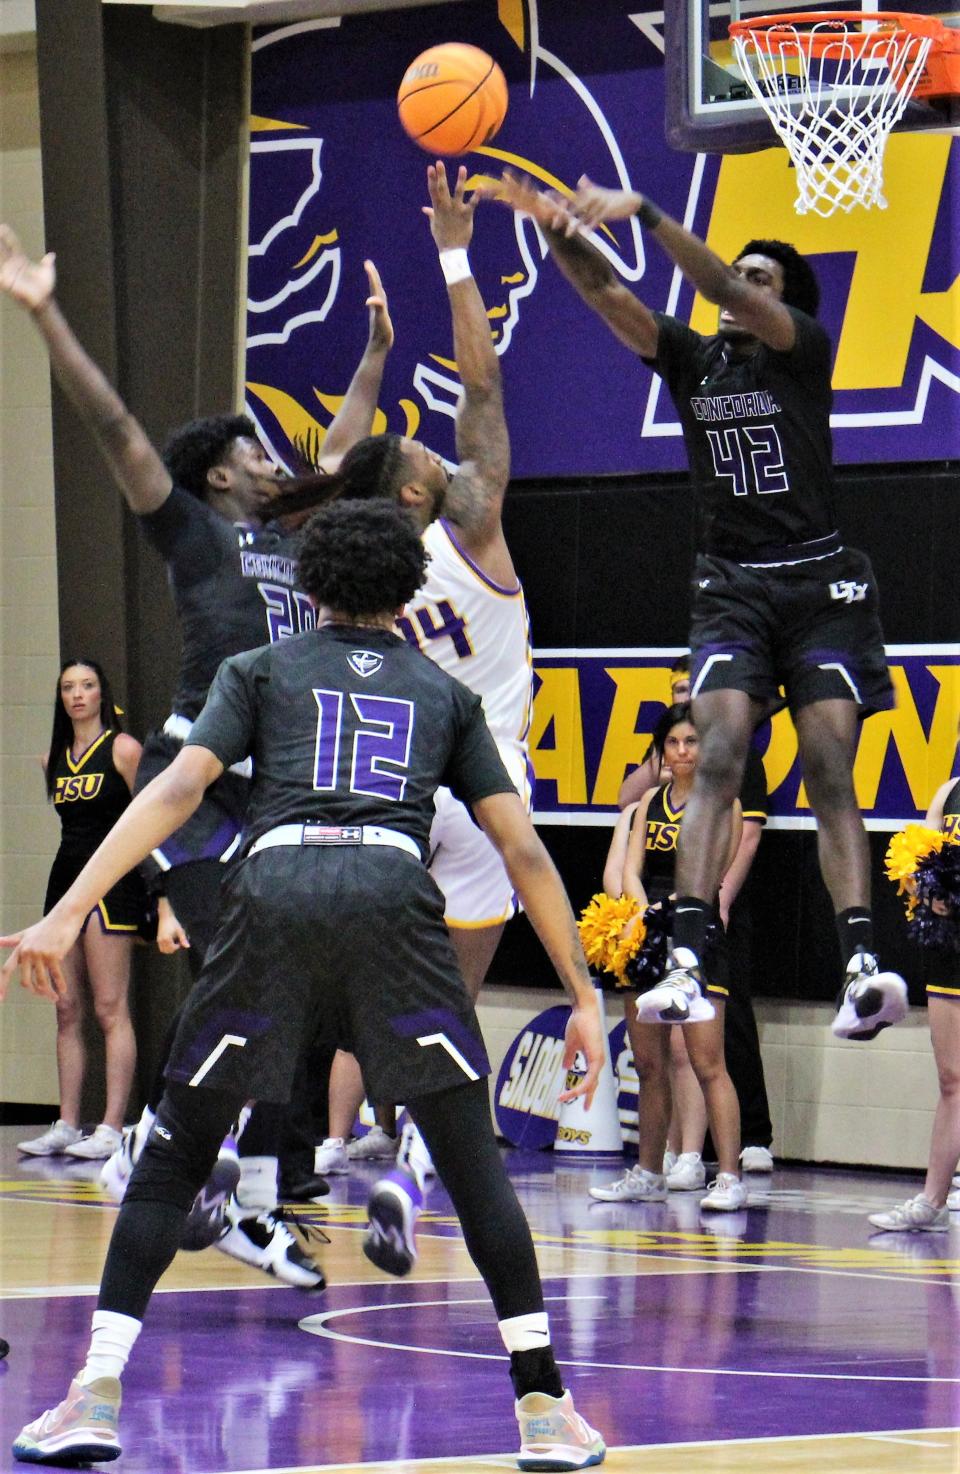 HSU's Steven Quinn (14) shoots over the leaping defense of Concordia's Robert Hall in the second half of their American Southwest Conference quarterfinal game Tuesday at the Mabee Complex. The Cowboys won 101-96, beating the Tornados for the third time this year - scoring 100 points or more each game.